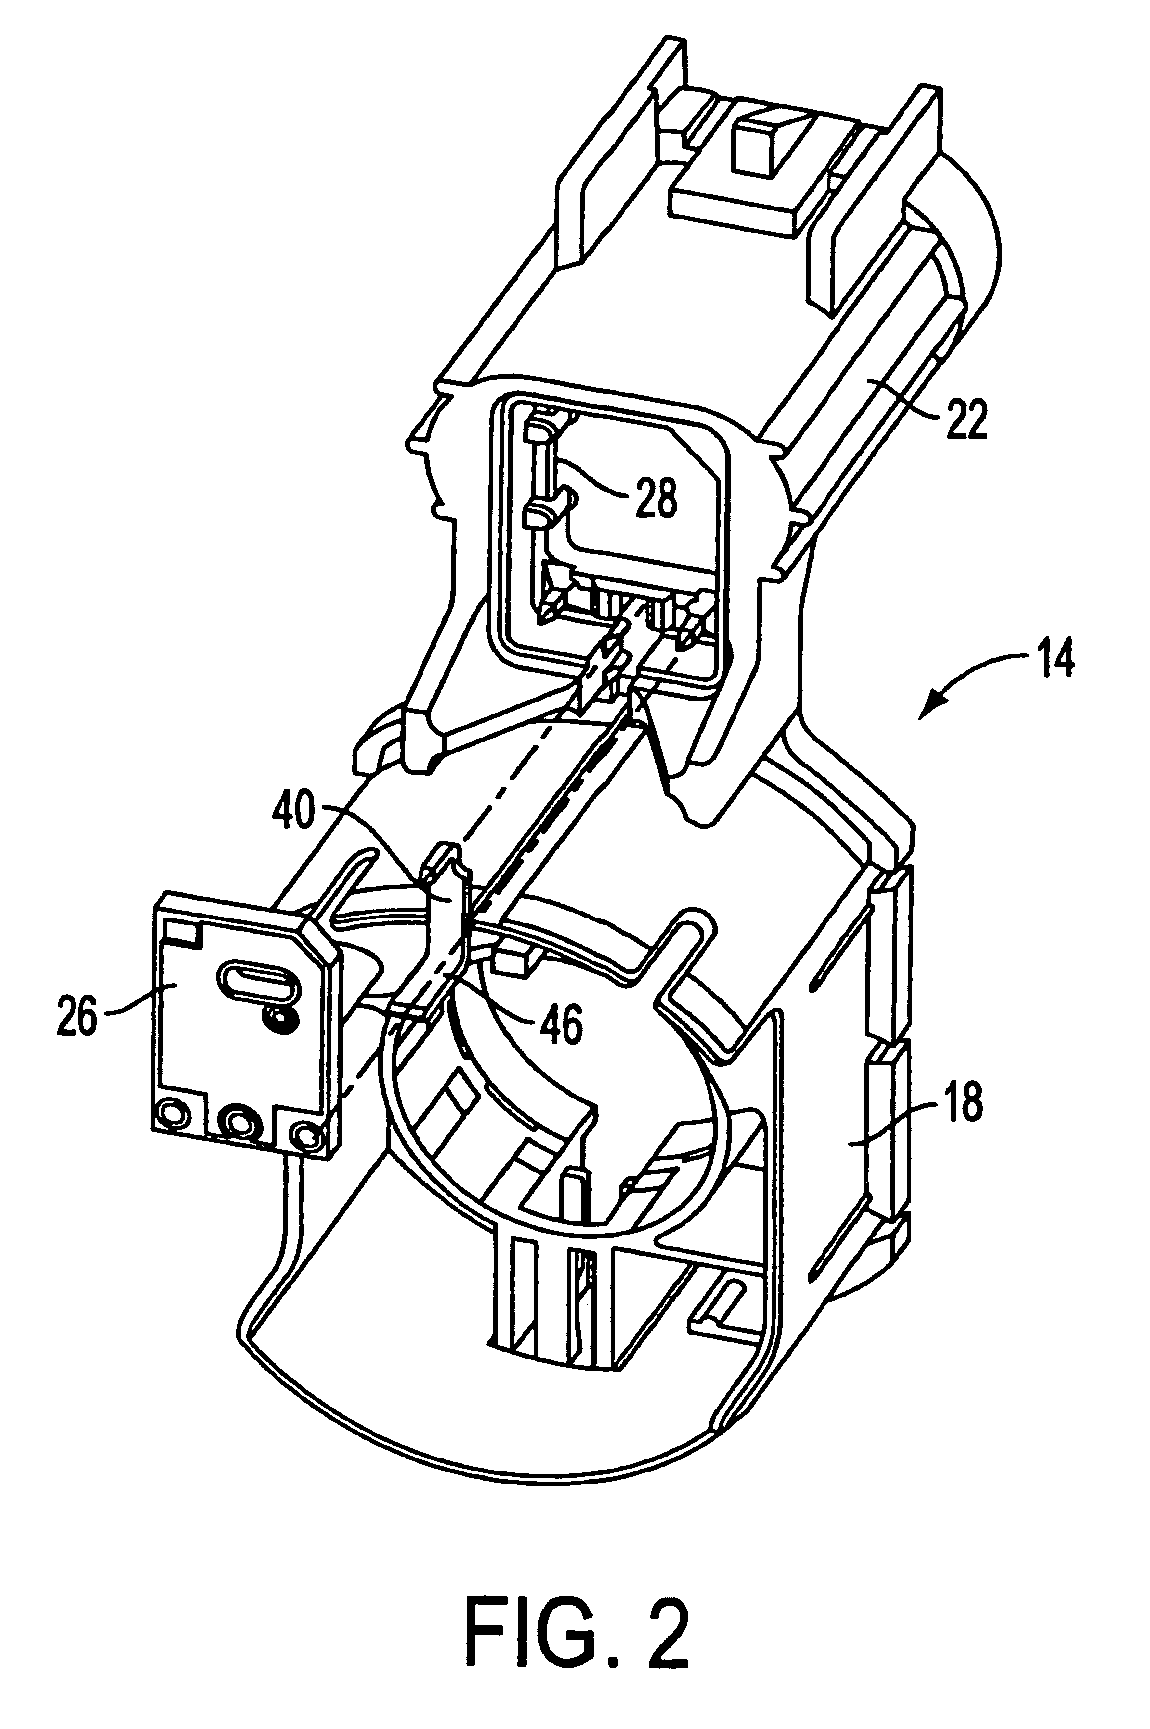 EMI suppression in permanent magnet DC motors having PCB outside motor in connector and overmolded